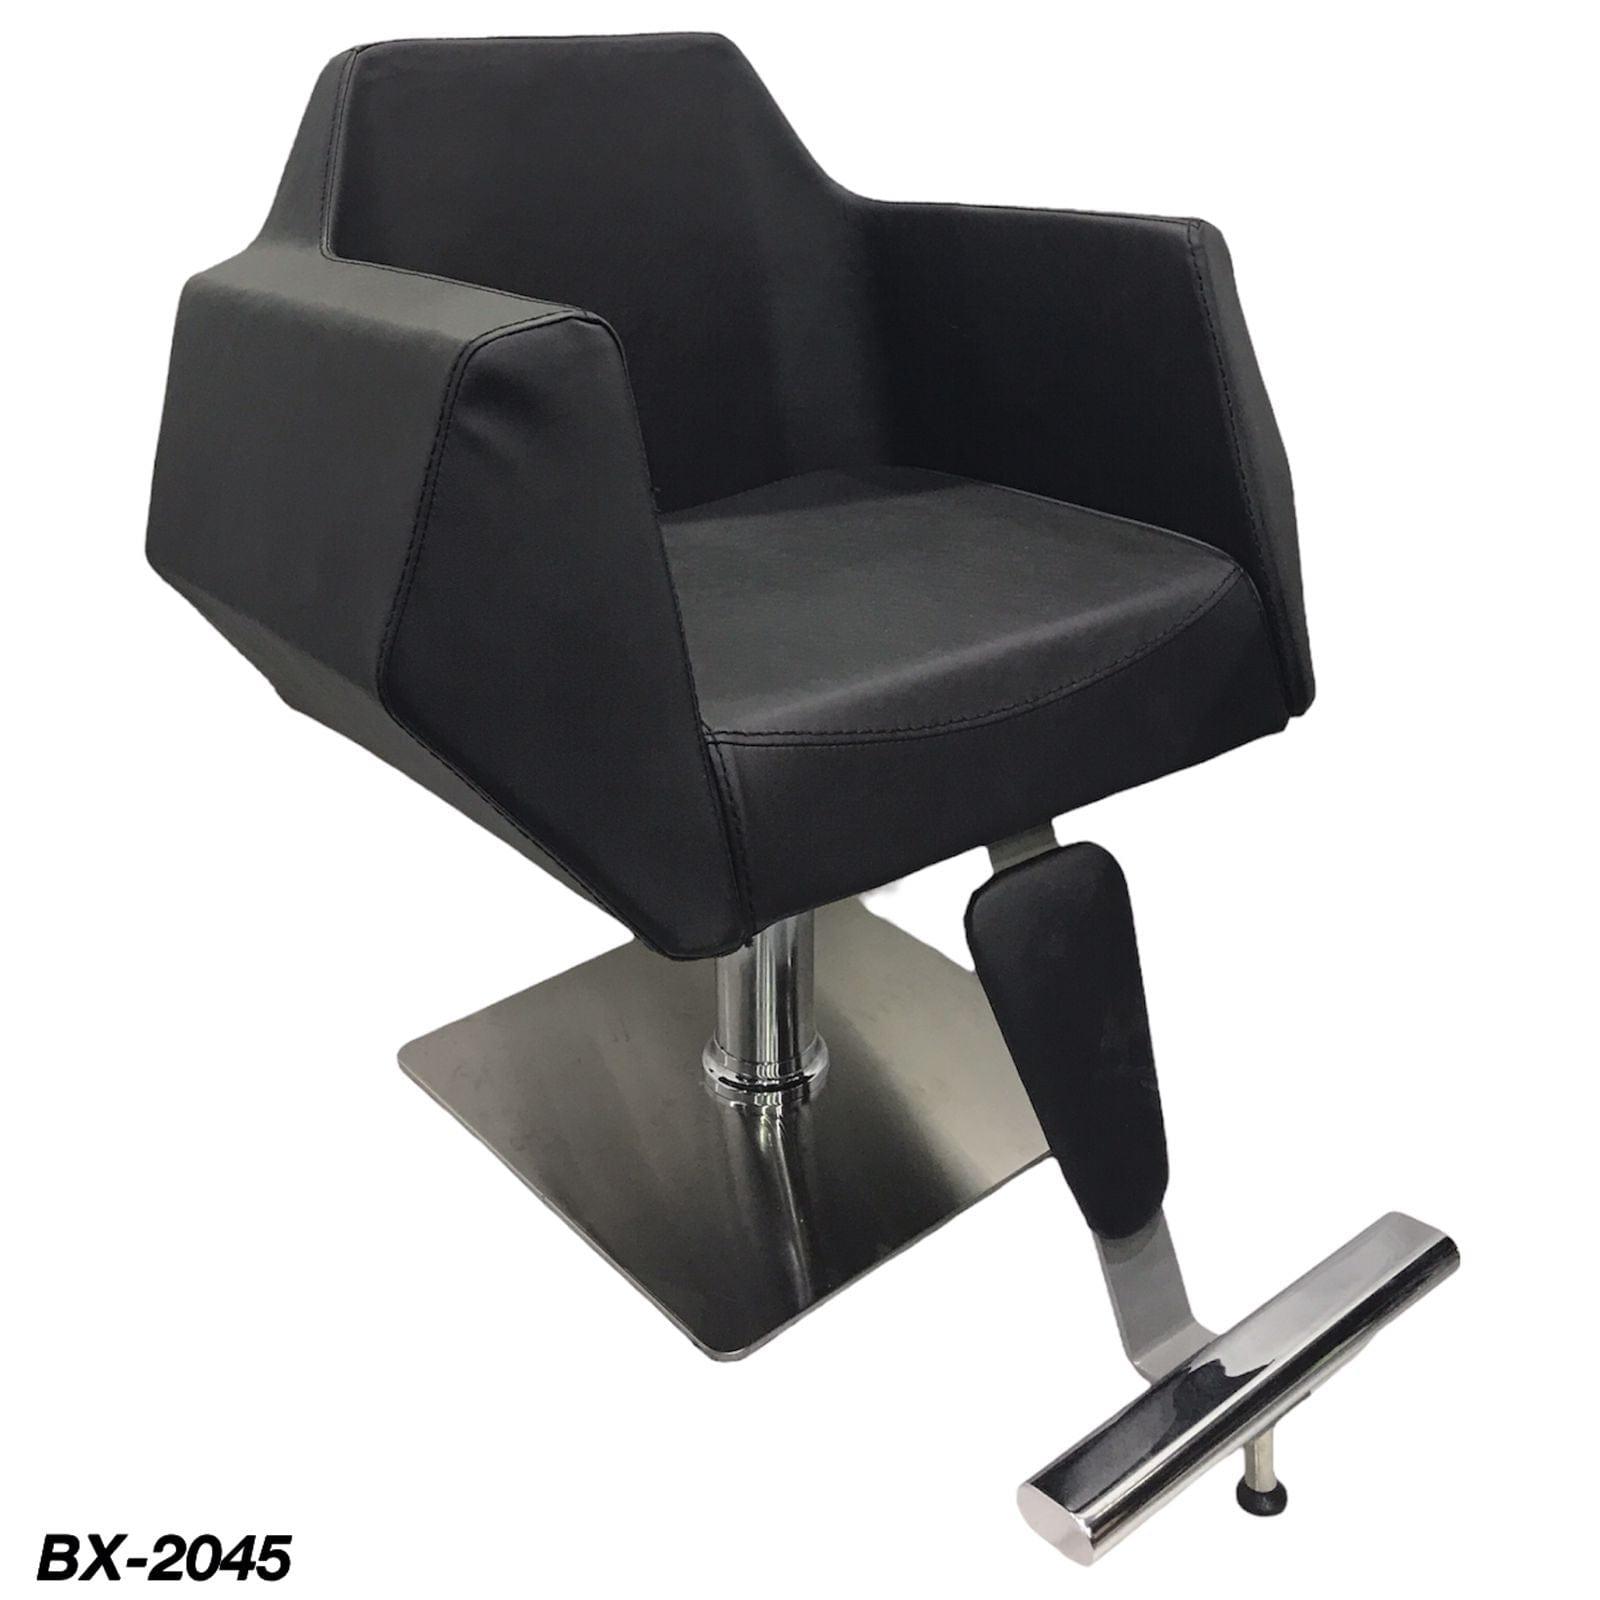 Globalstar Professional Ladies Styling Chair BX-2045